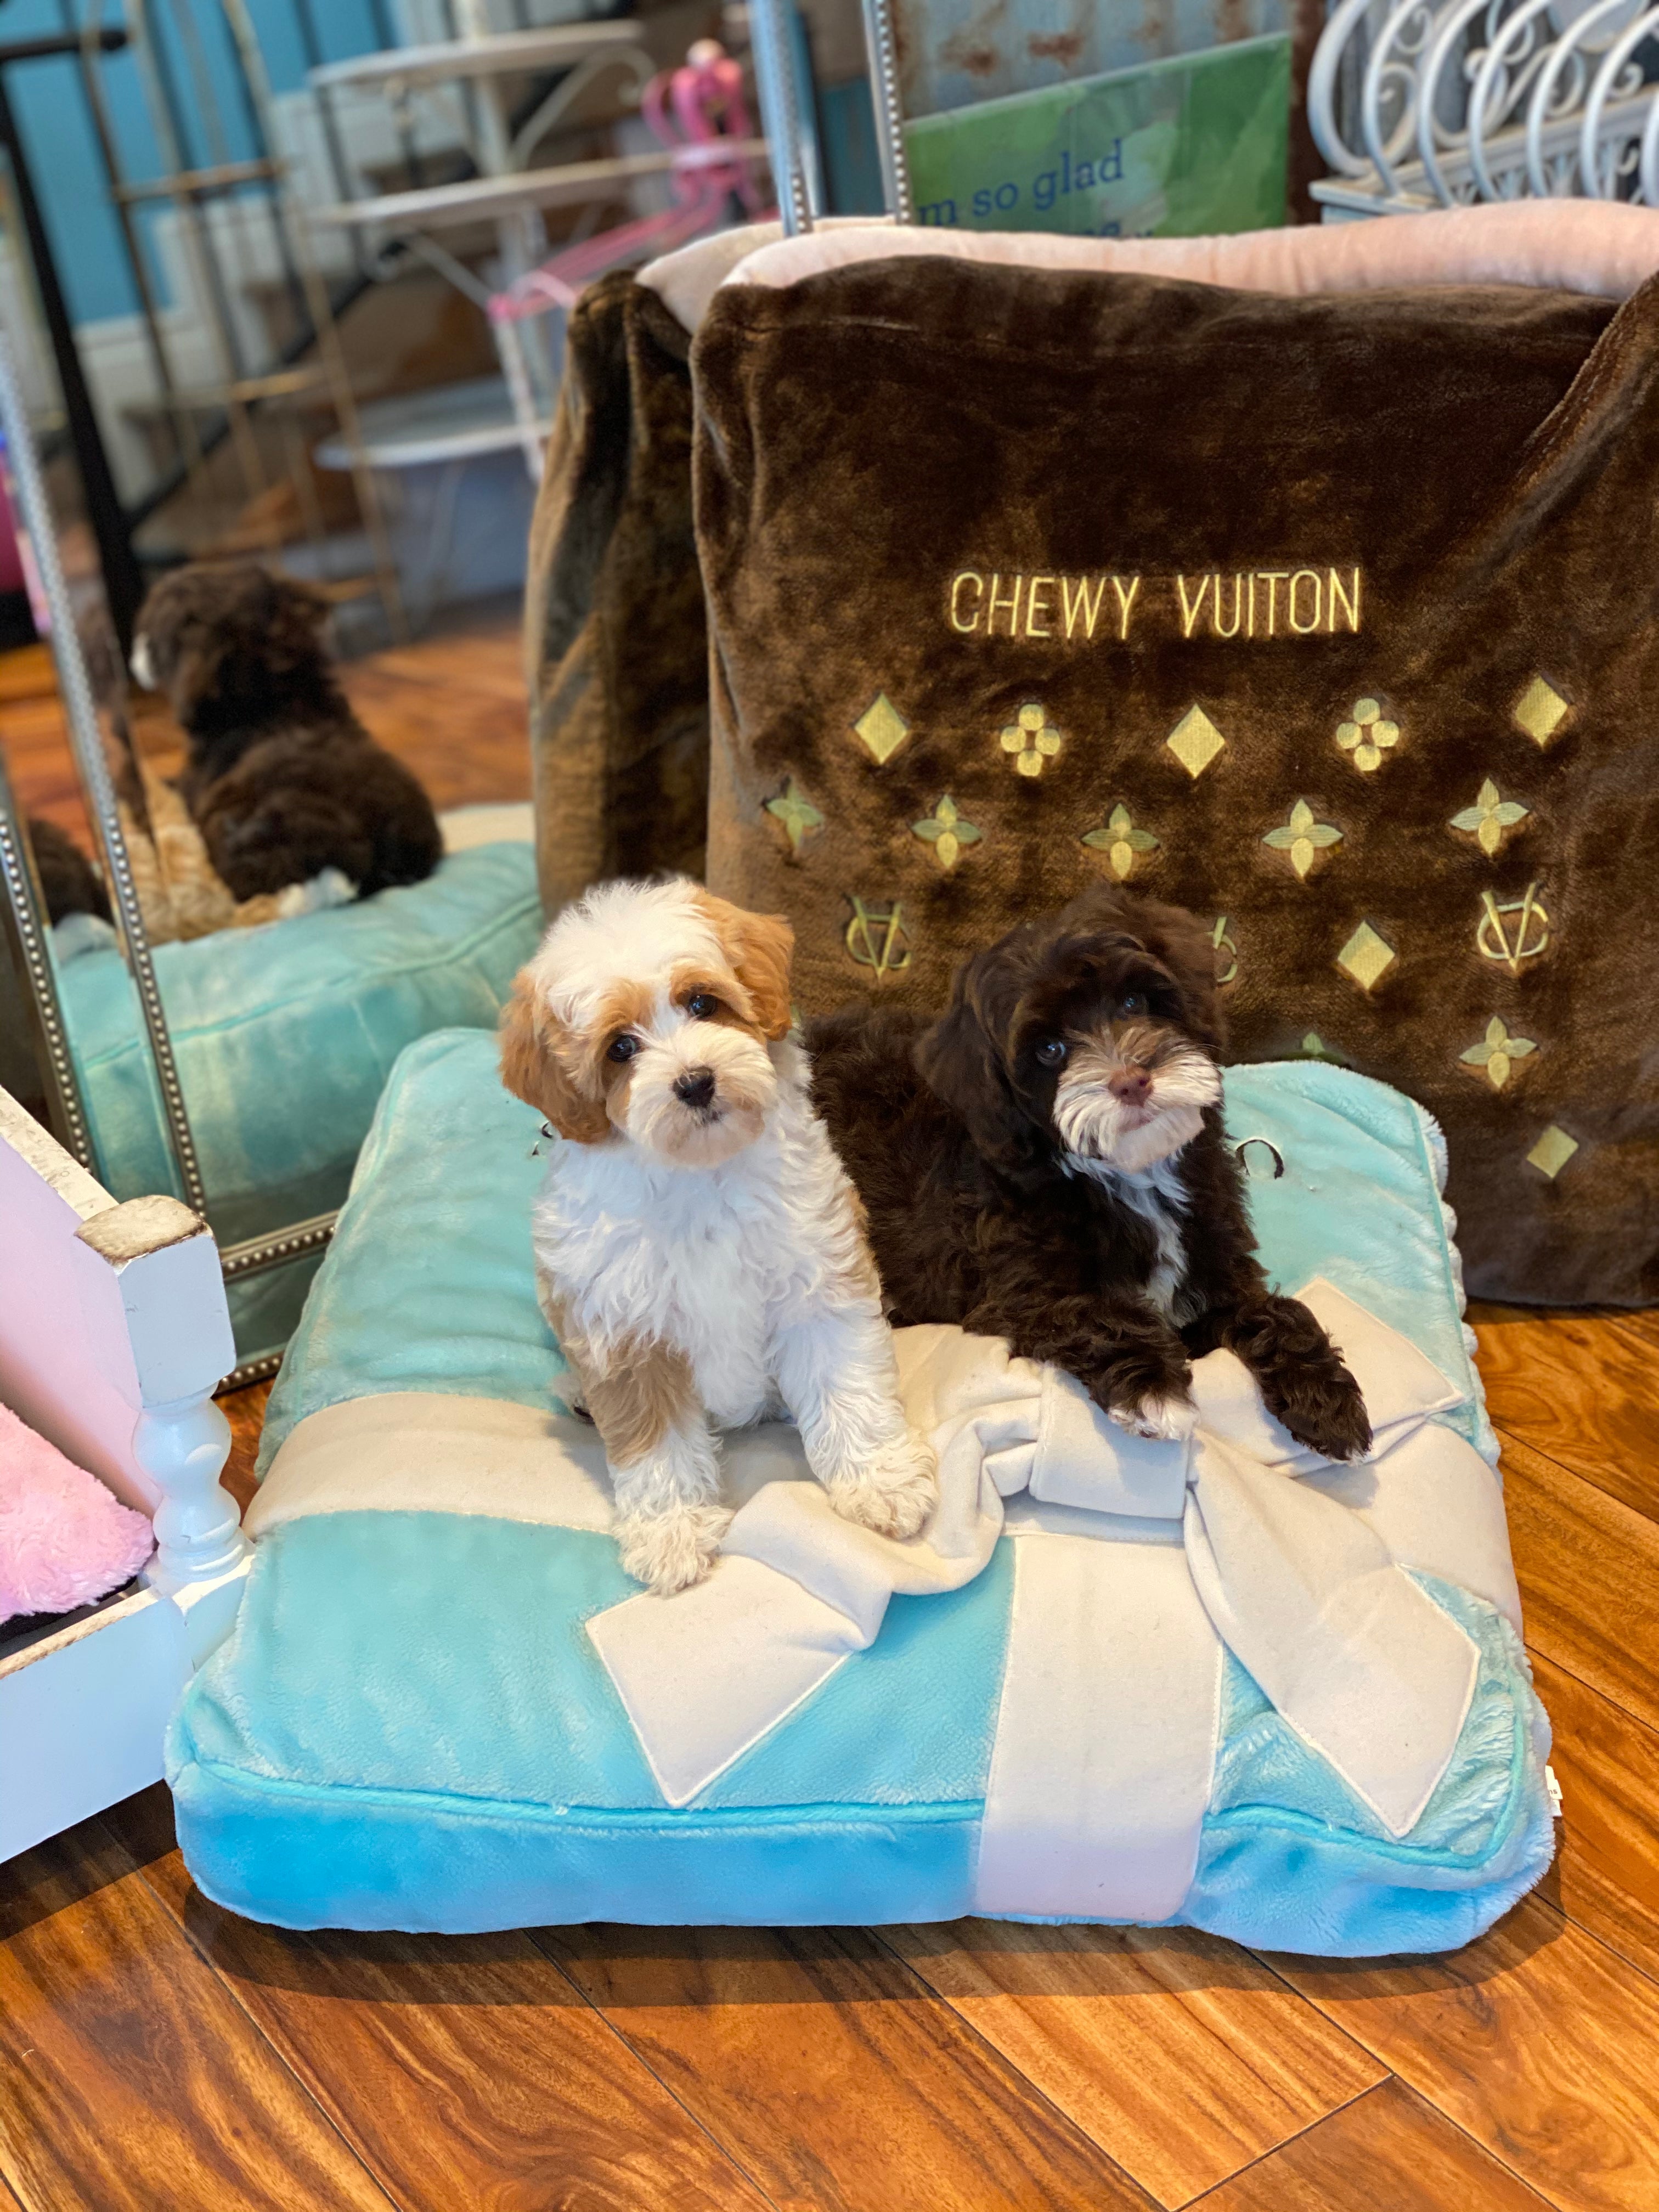 Pink Fluffy Chewy Vuitton Bed